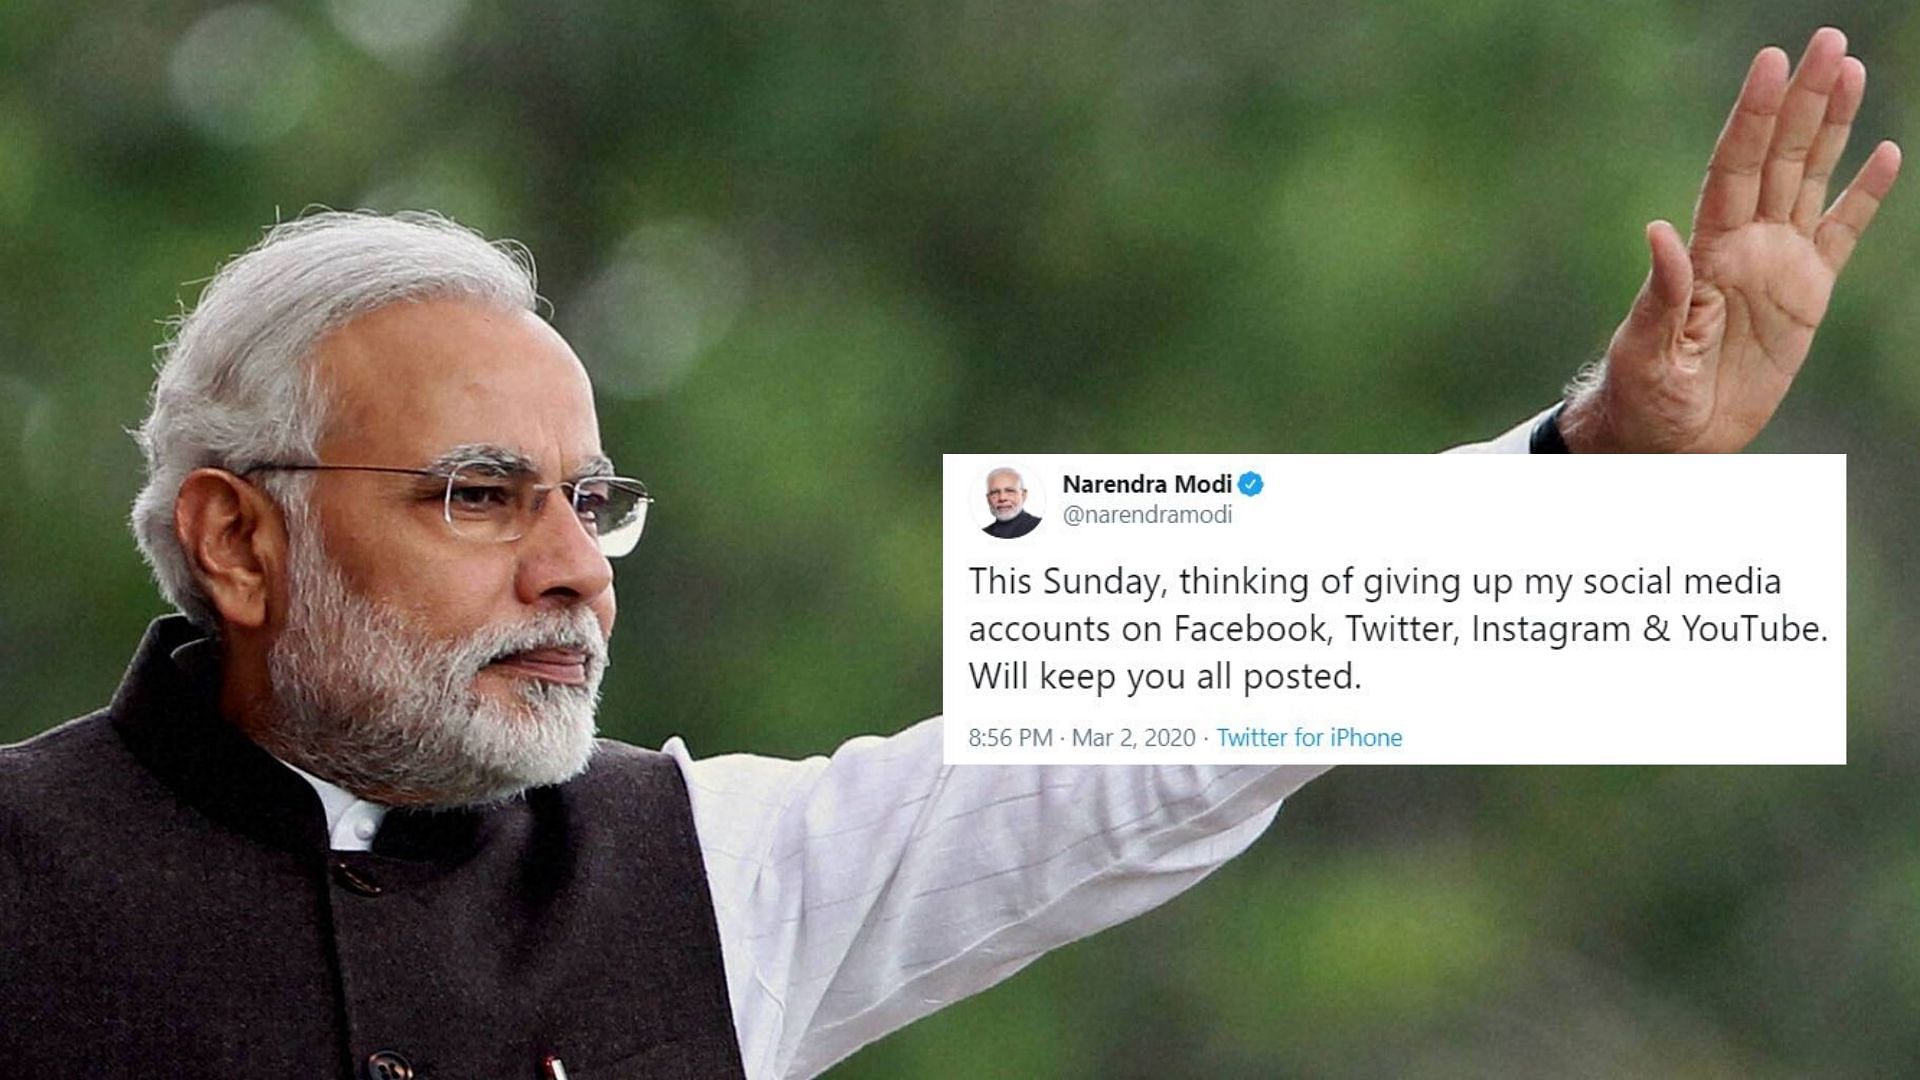 Whether the PM is thinking of quitting social media for good or just for Sunday is not clear.